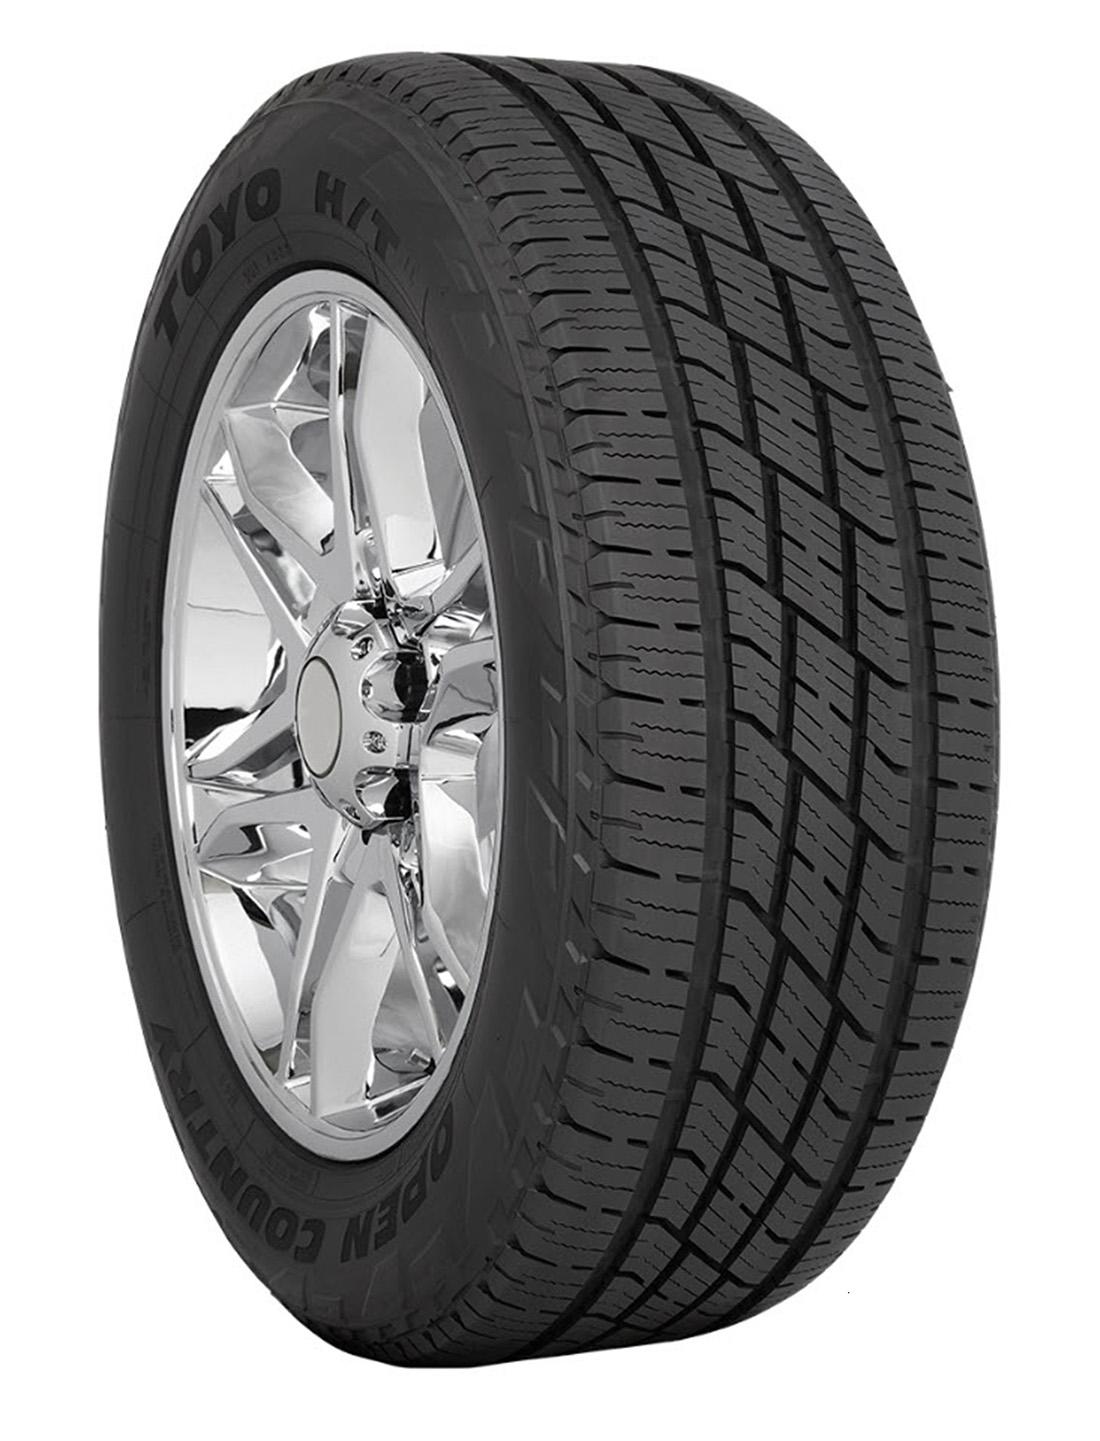 Toyo - PROXES HT  NW  275/40R17